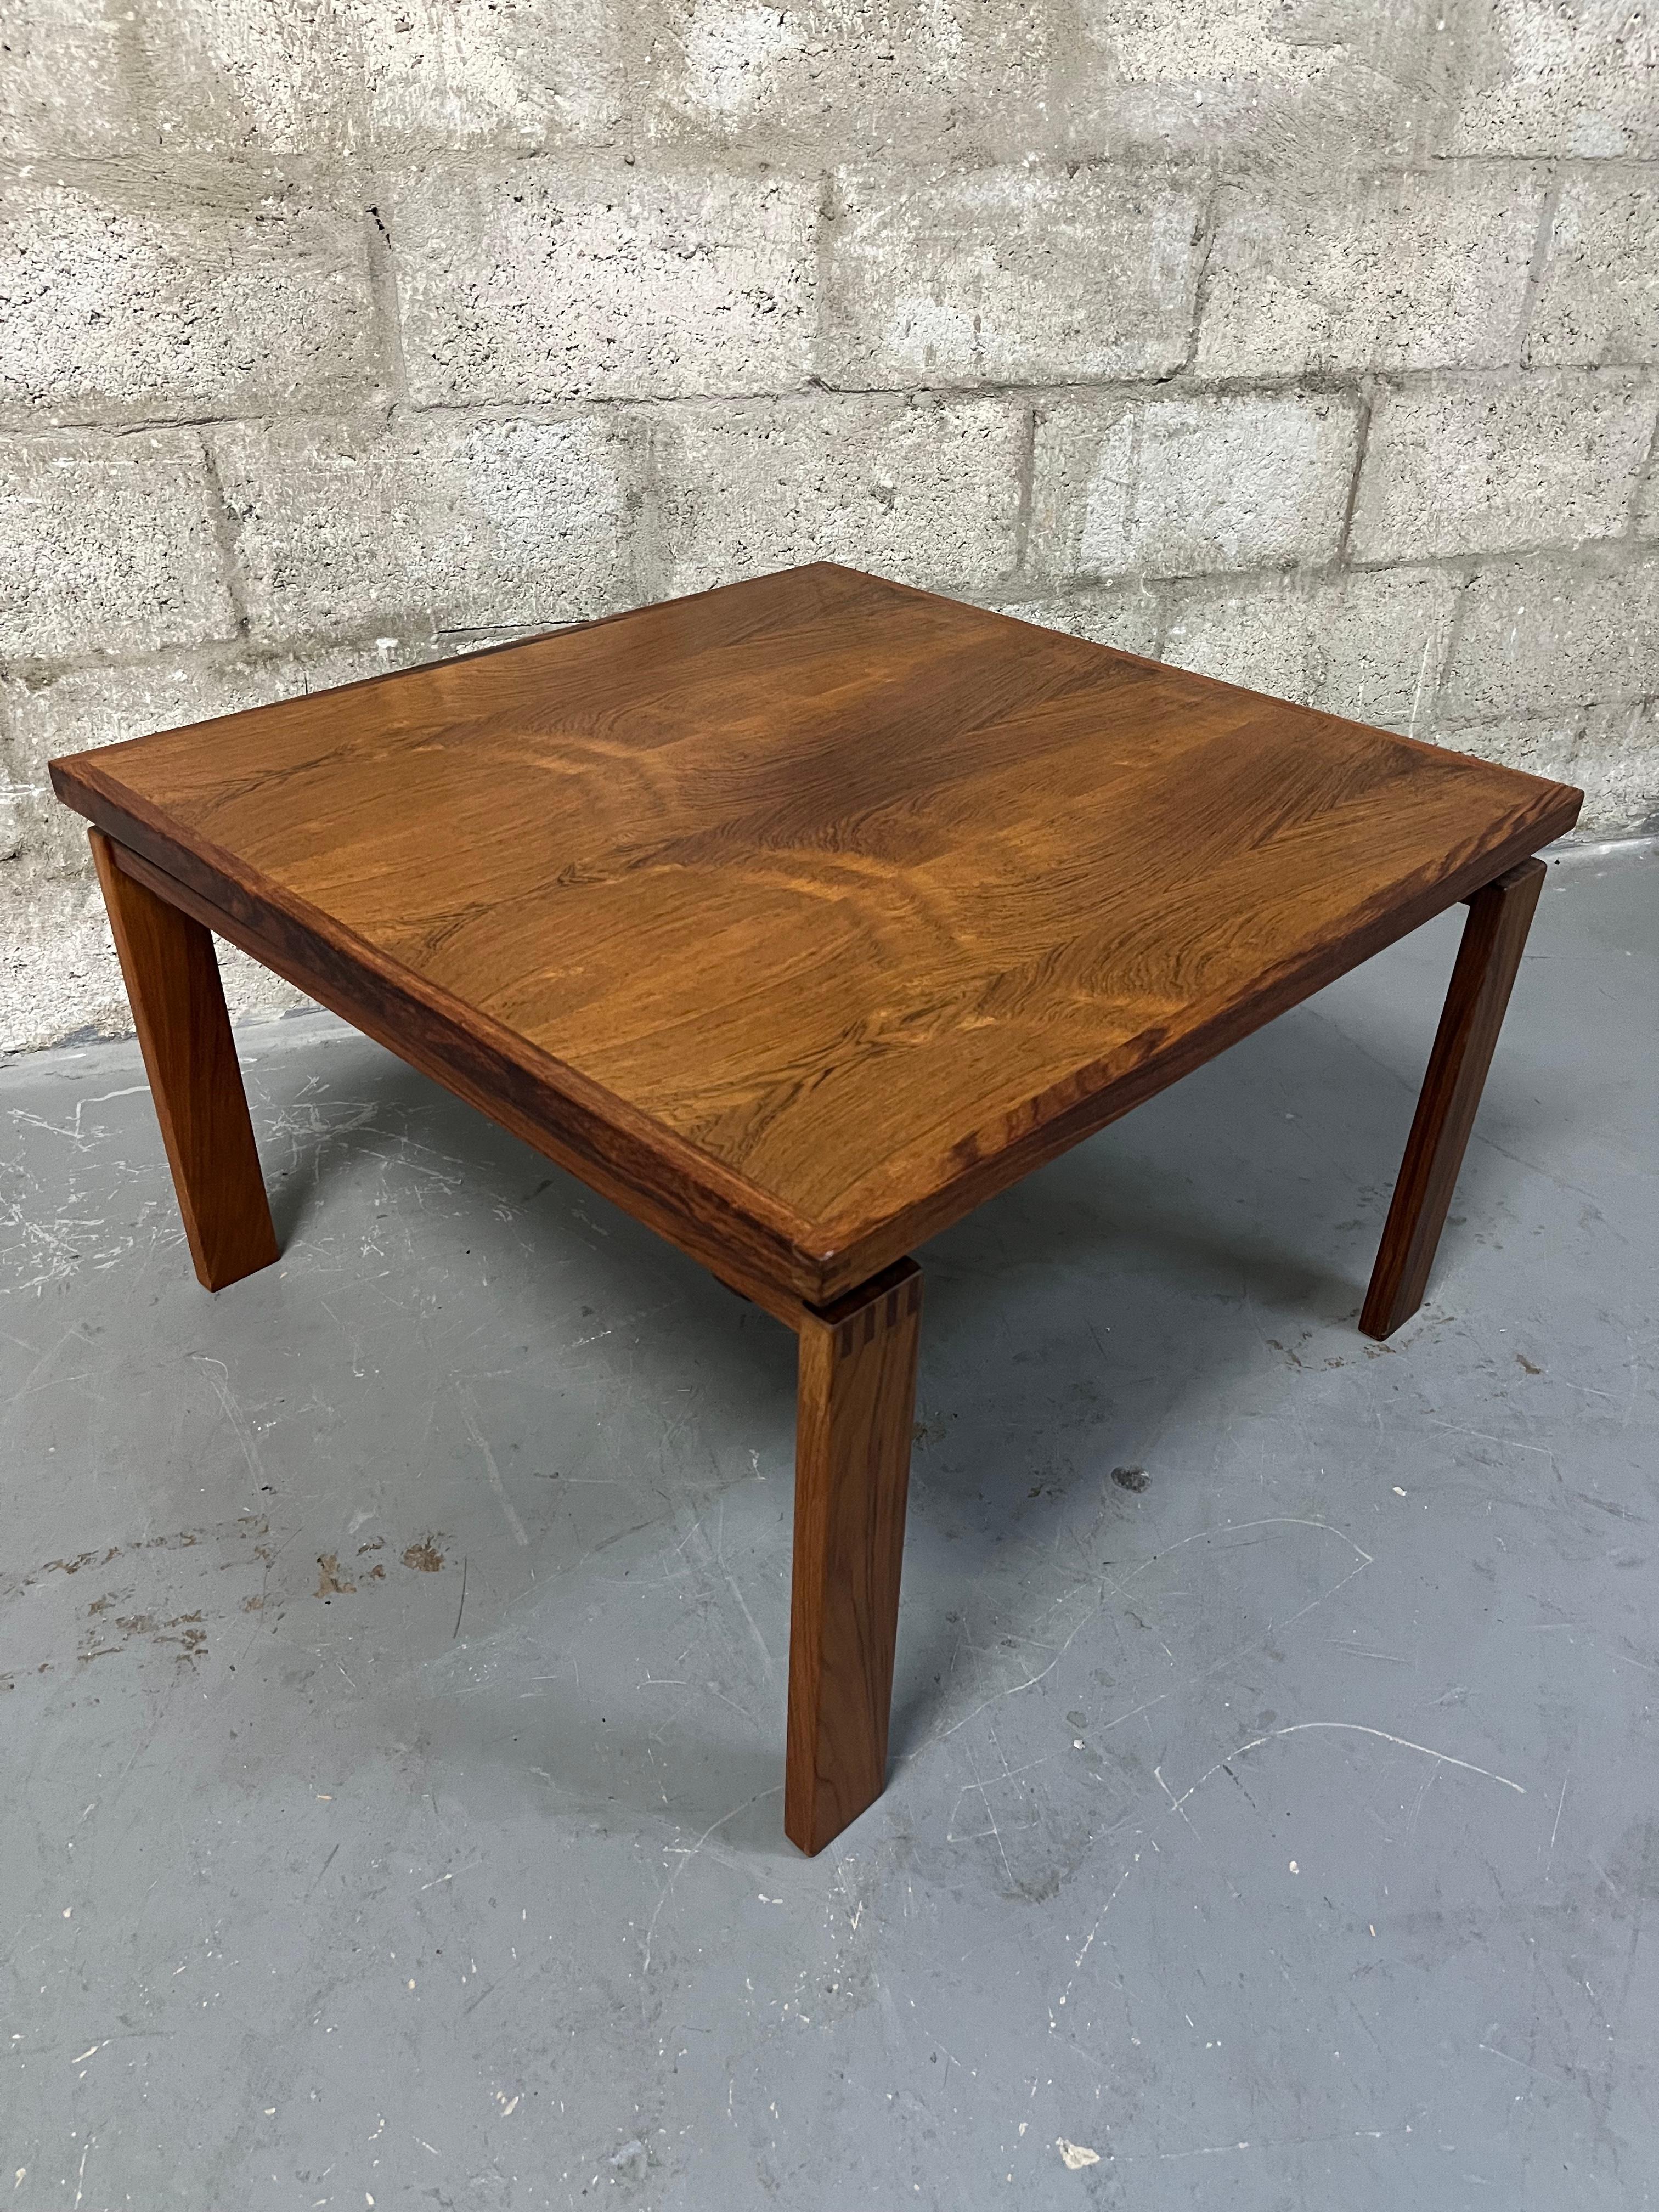 Danish Mid Century Modern Floating Coffee Table by Trioh Mobler Denmark in the Jens Risom's Style. Dated 1979.
Features a minimalist Scandinavian Modern design with clean geometric lines, a floating wood top, solid wood legs with dovetailed joins,